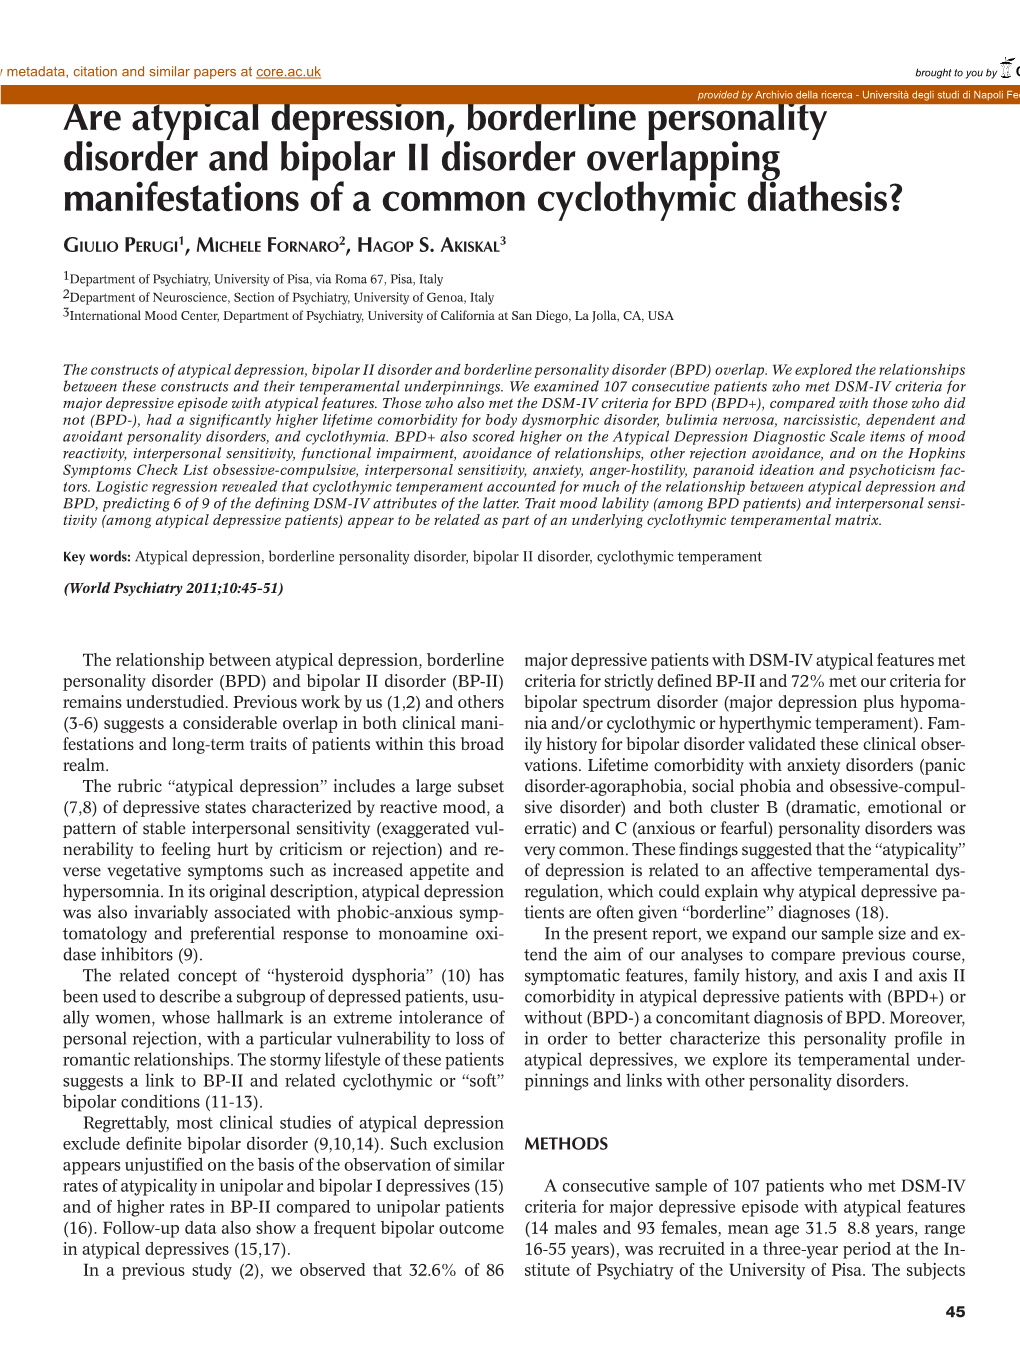 Are Atypical Depression, Borderline Personality Disorder and Bipolar II Disorder Overlapping Manifestations of a Common Cyclothymic Diathesis?